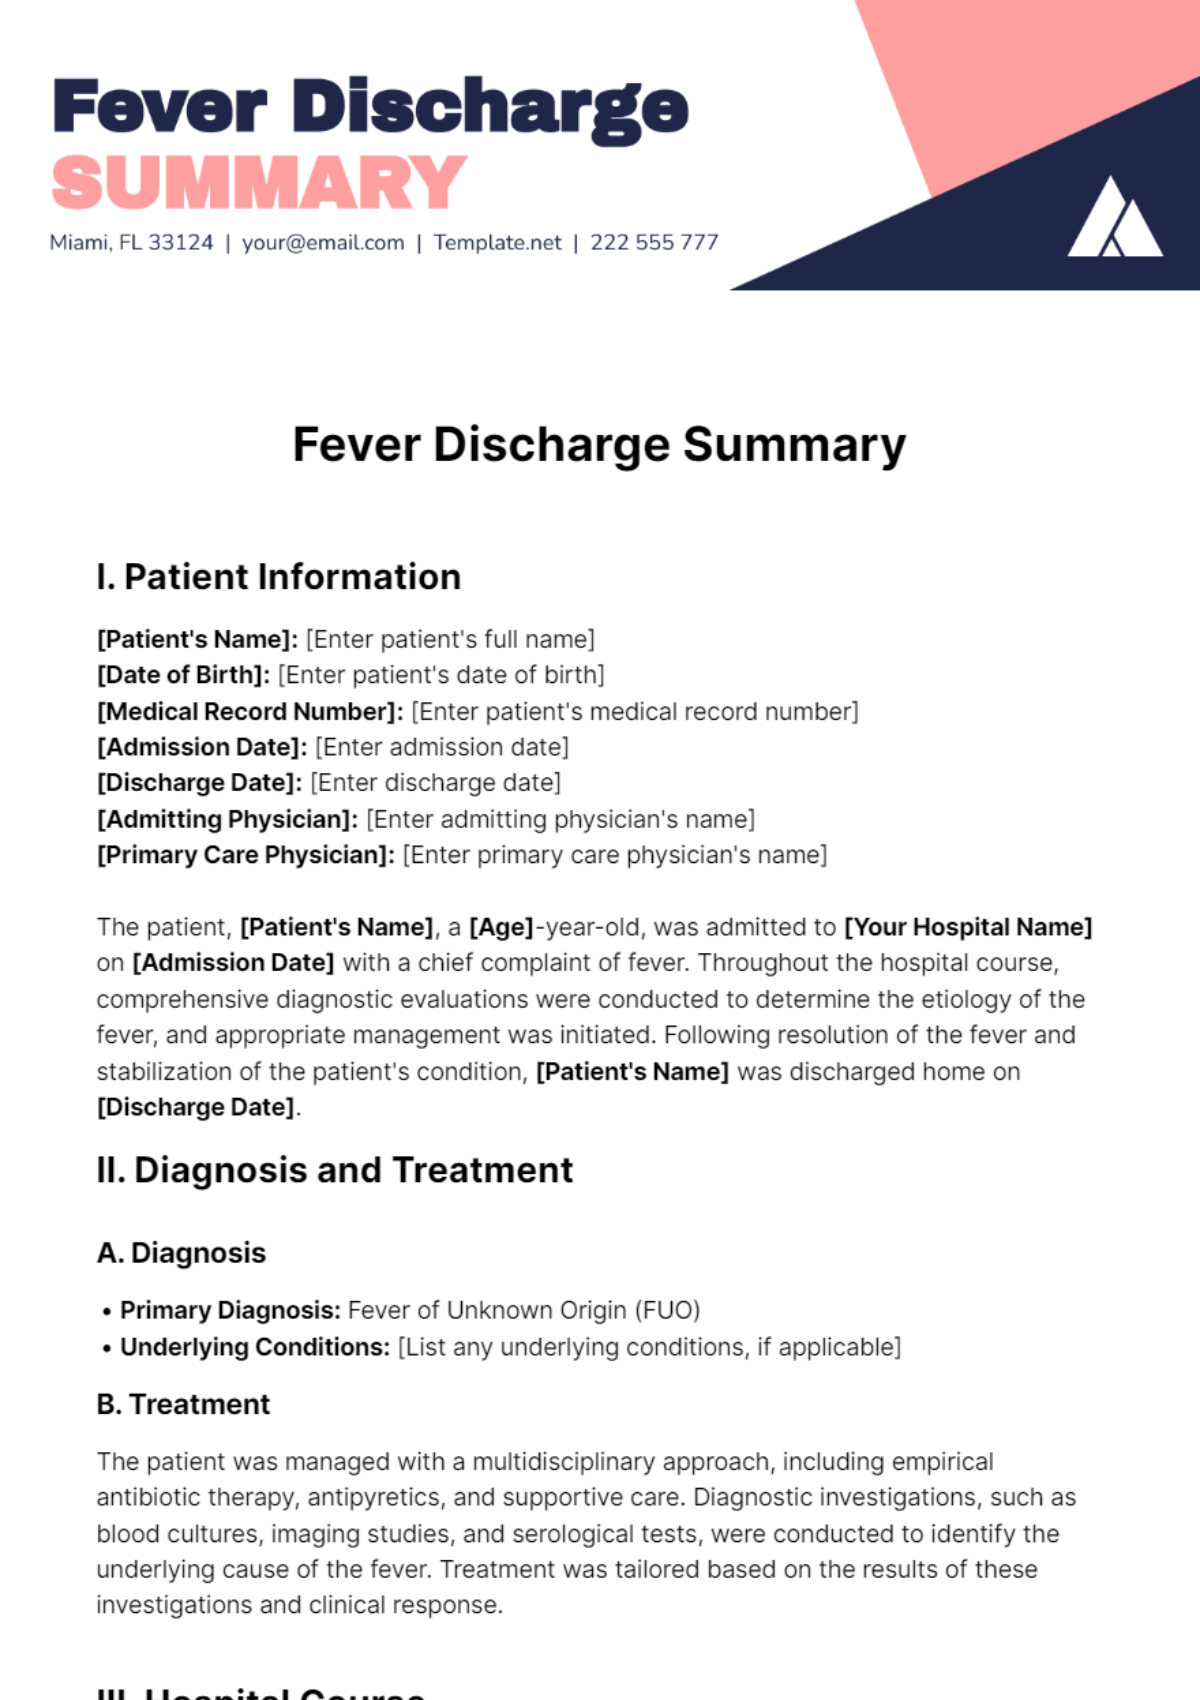 Free Fever Discharge Summary Template